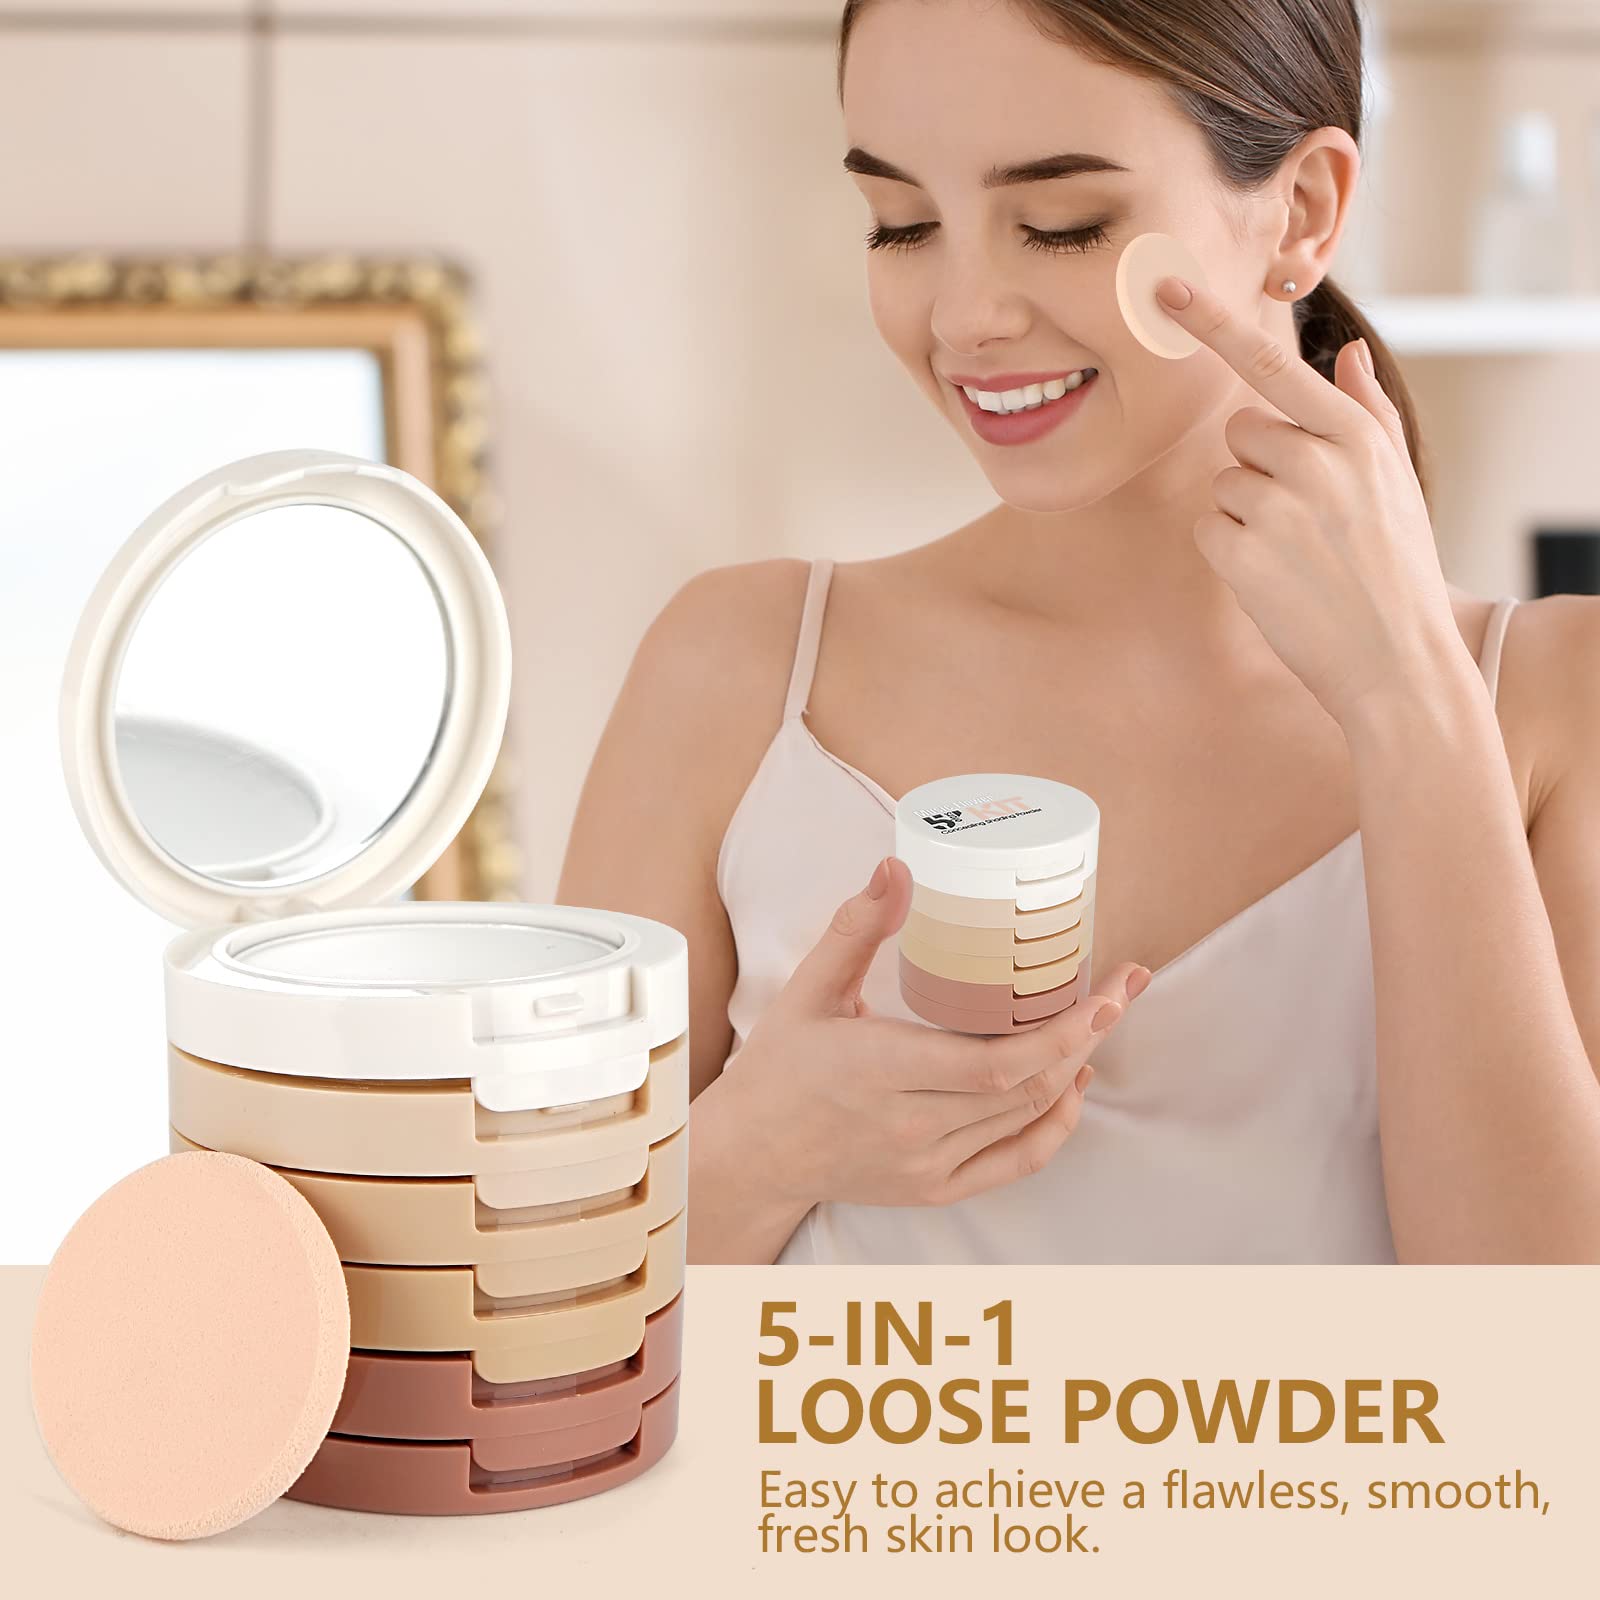 Meao Multi-layer 5 Colour Makeup Powder Compact Powder Make up Contour Face Bronzing Foundation Correcting Pressed Powder - Facial Base Contouring Beauty Cosmetics Bronzer Pallet Palette